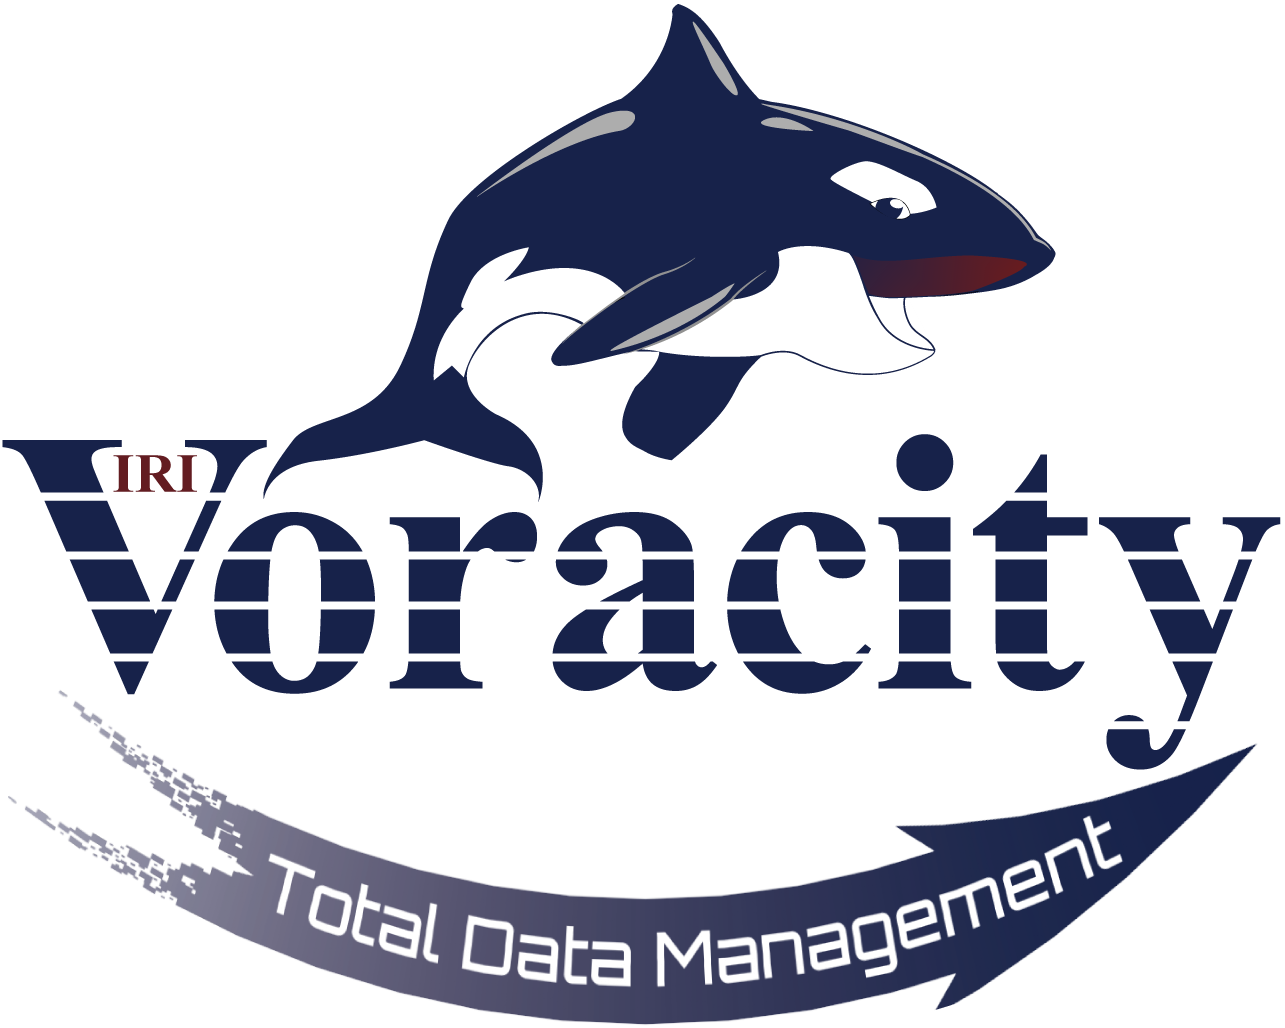 Voracity: Total Data Management You Can Afford from IRI, The CoSort Company